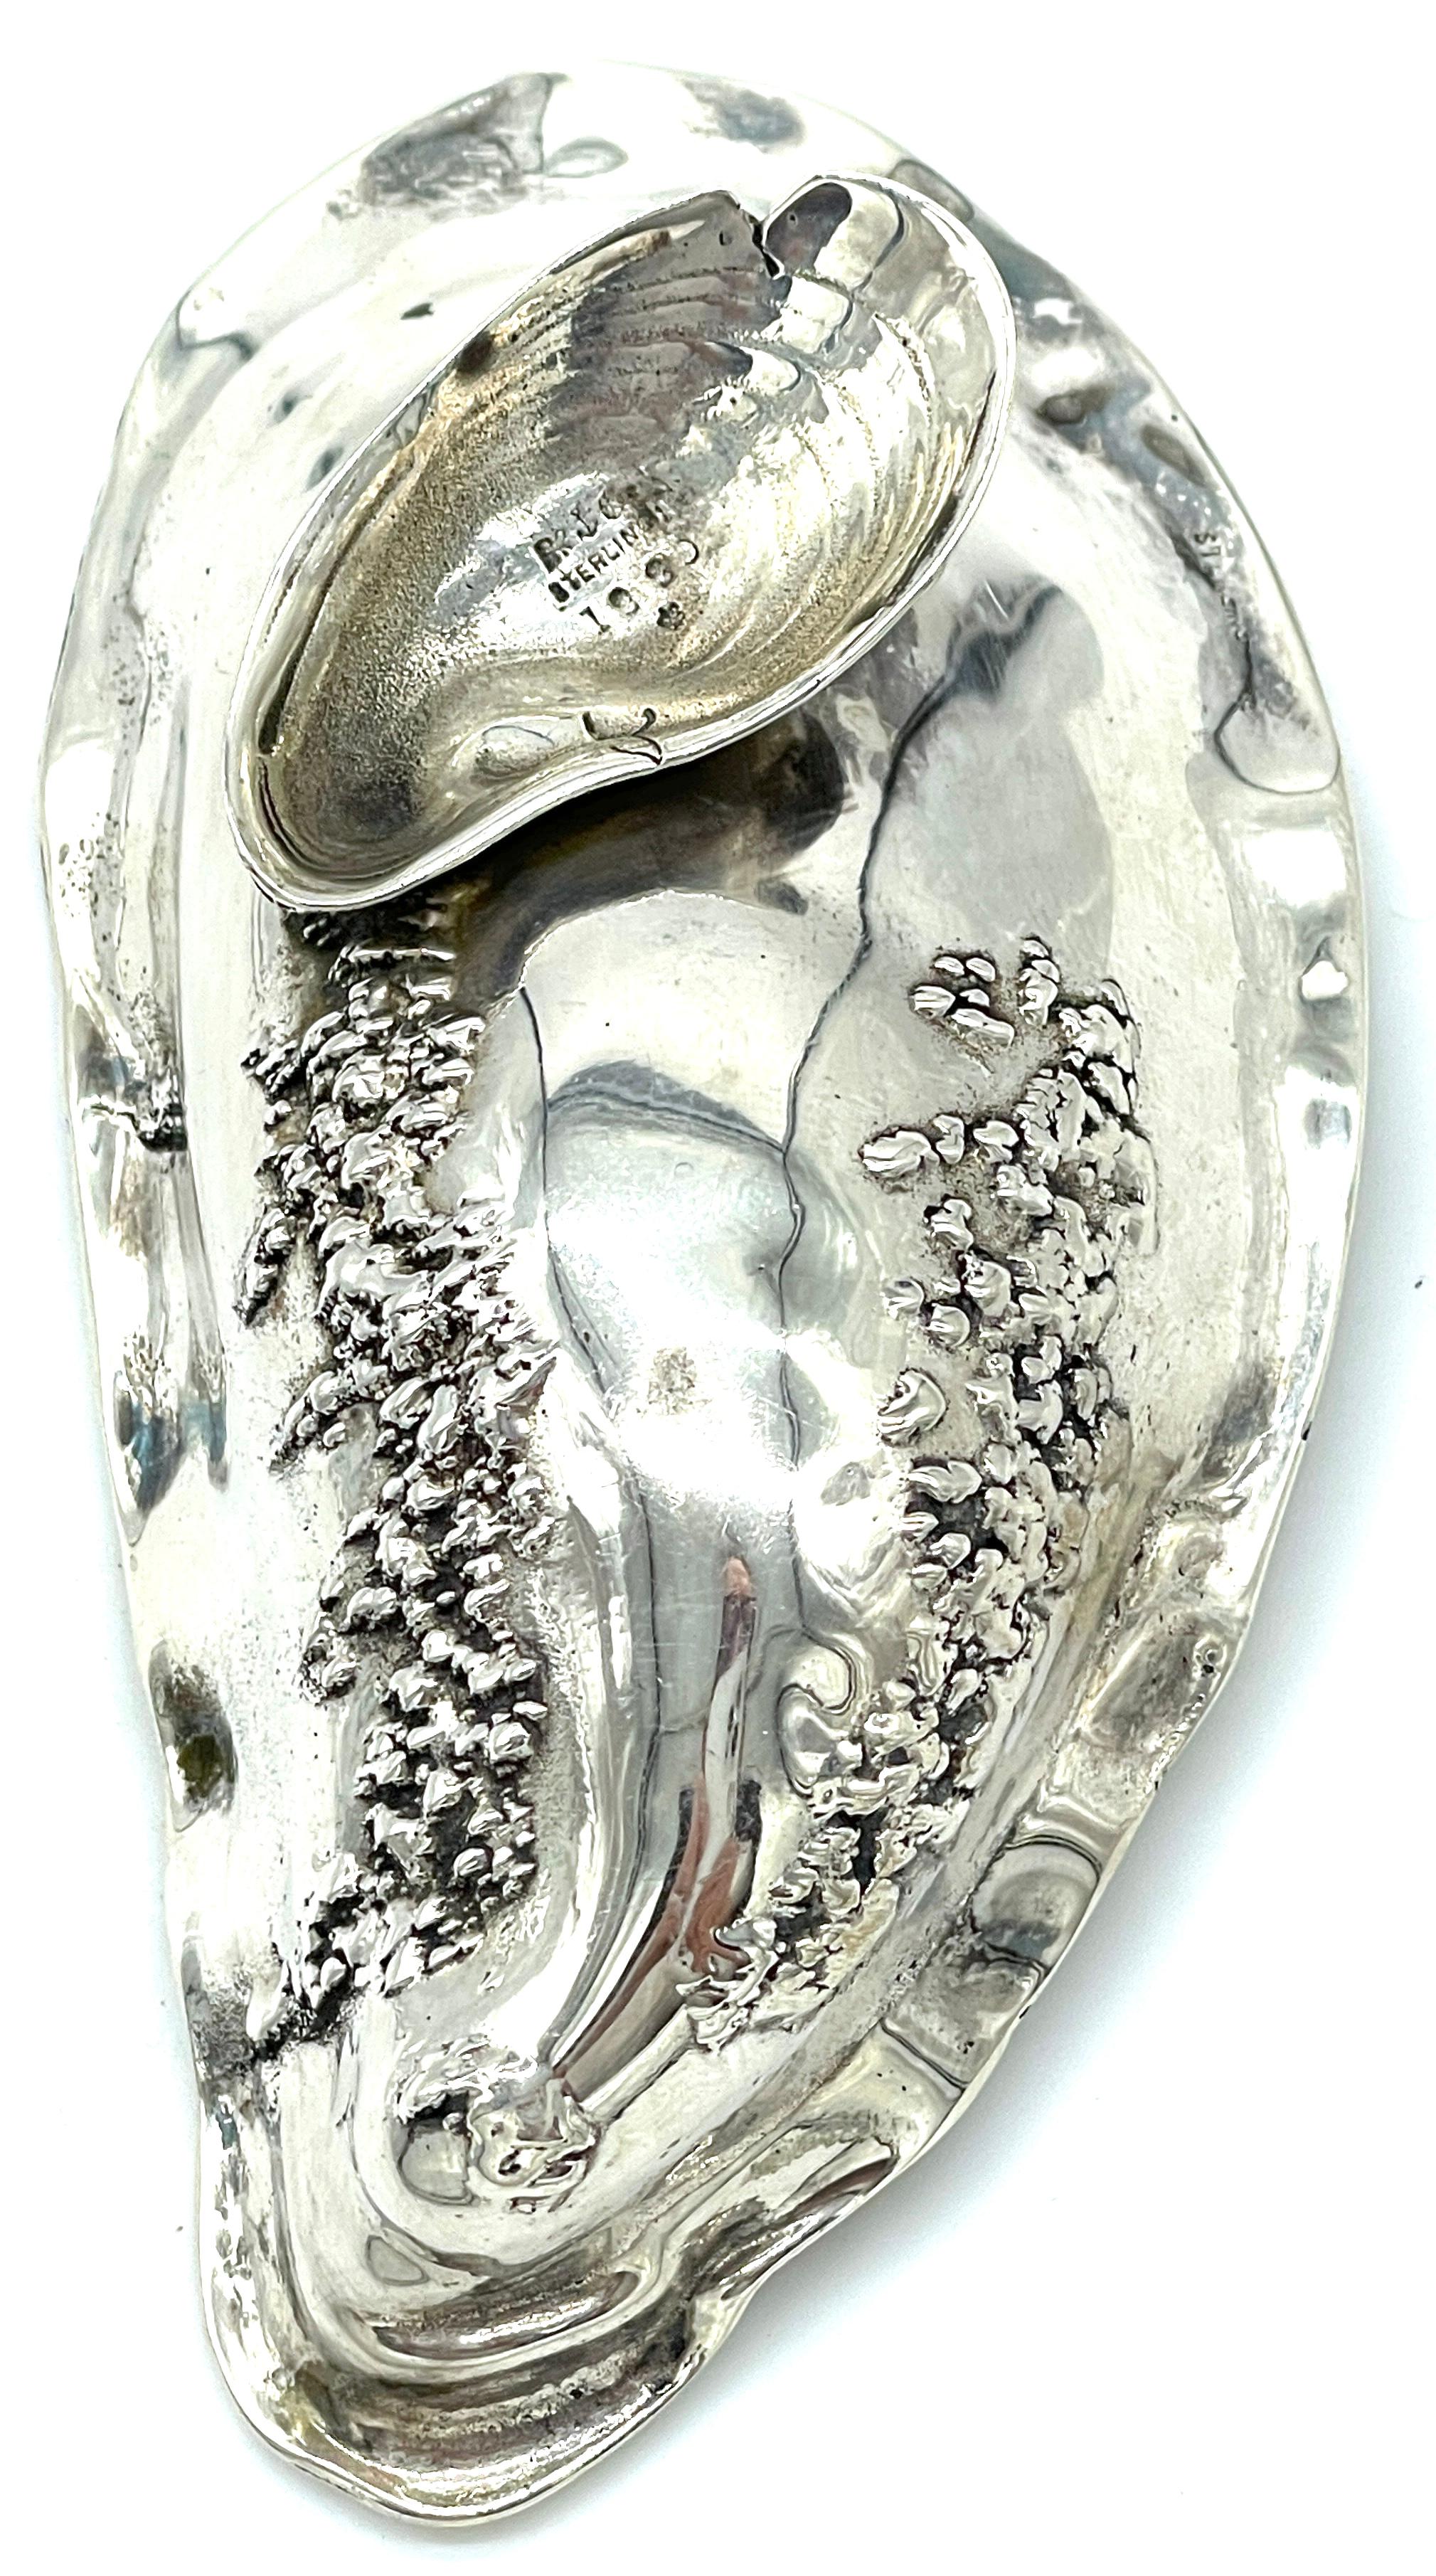 Gorham 'Narragansett' Sterling- Silver Shell Dish & Figural Crab Spoon For Sale 1